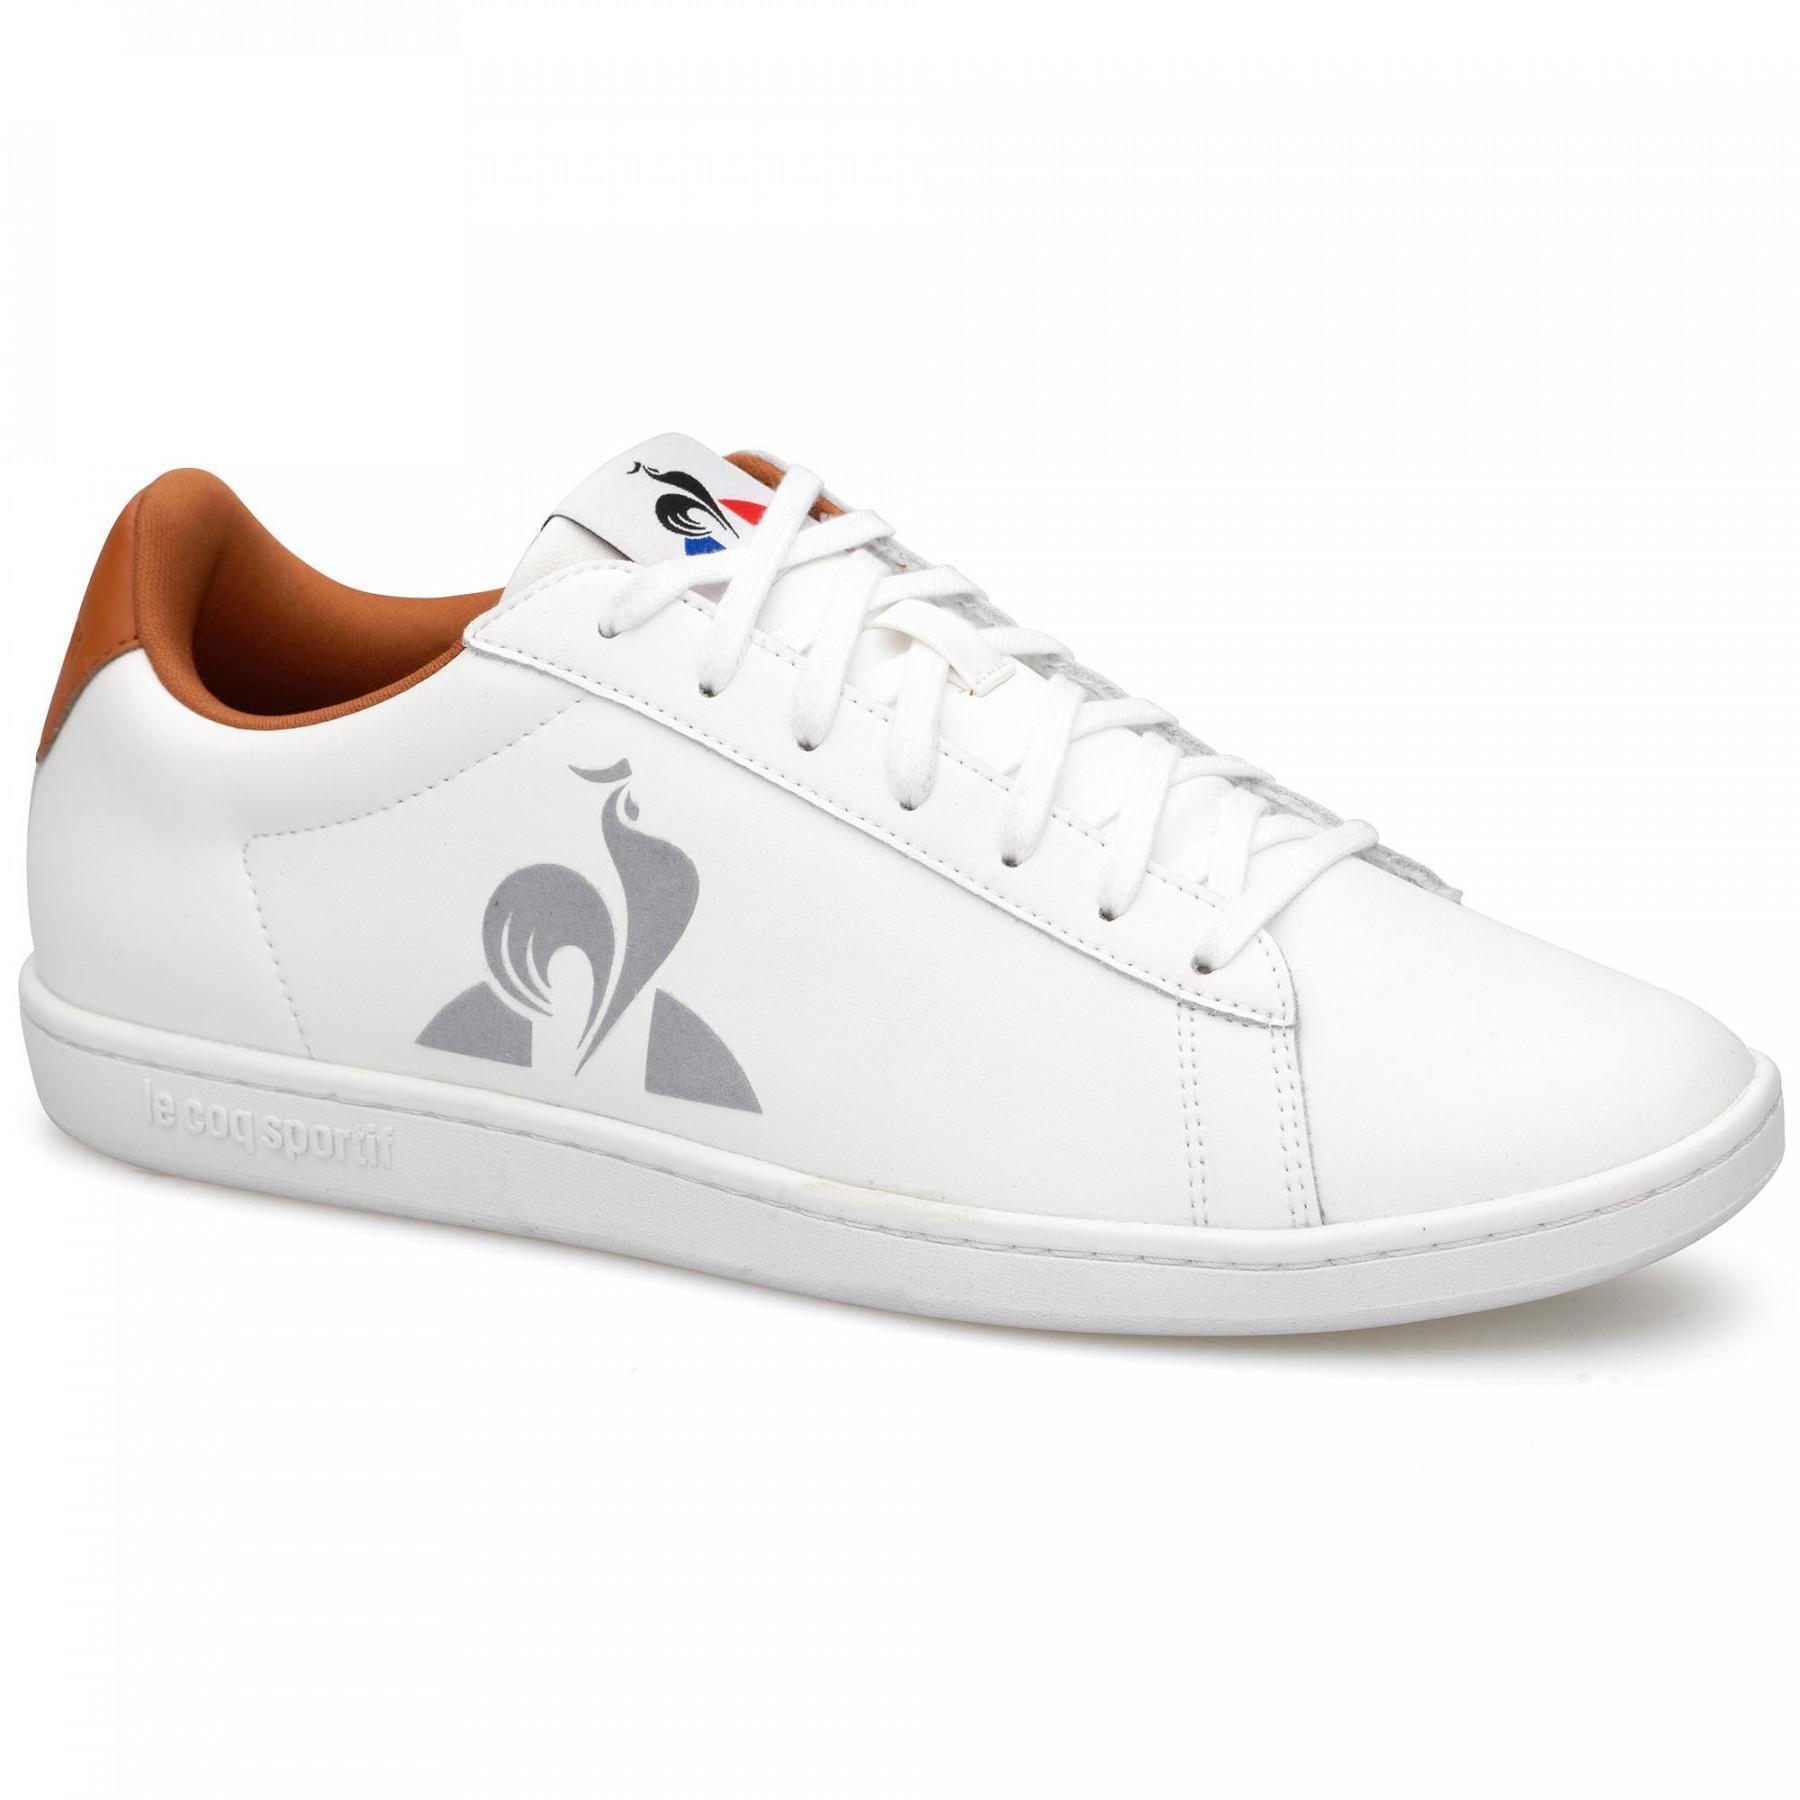 Formadores Le Coq Sportif Master Court optical